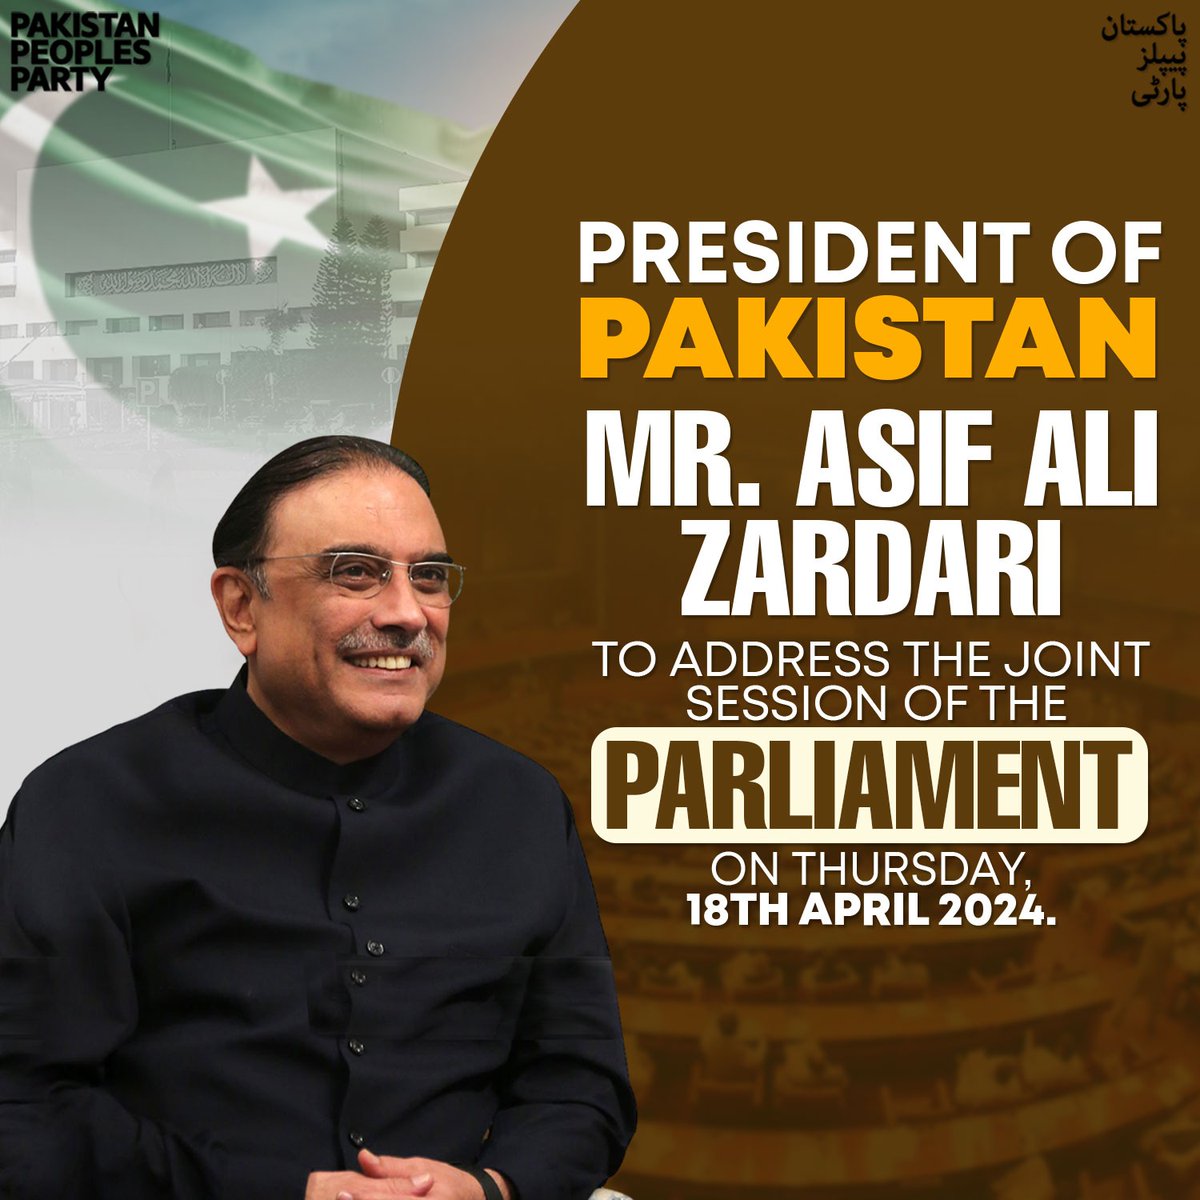 President of Pakistan Mr. Asif Ali Zardari to address the joint session of the Parliament tomorrow.